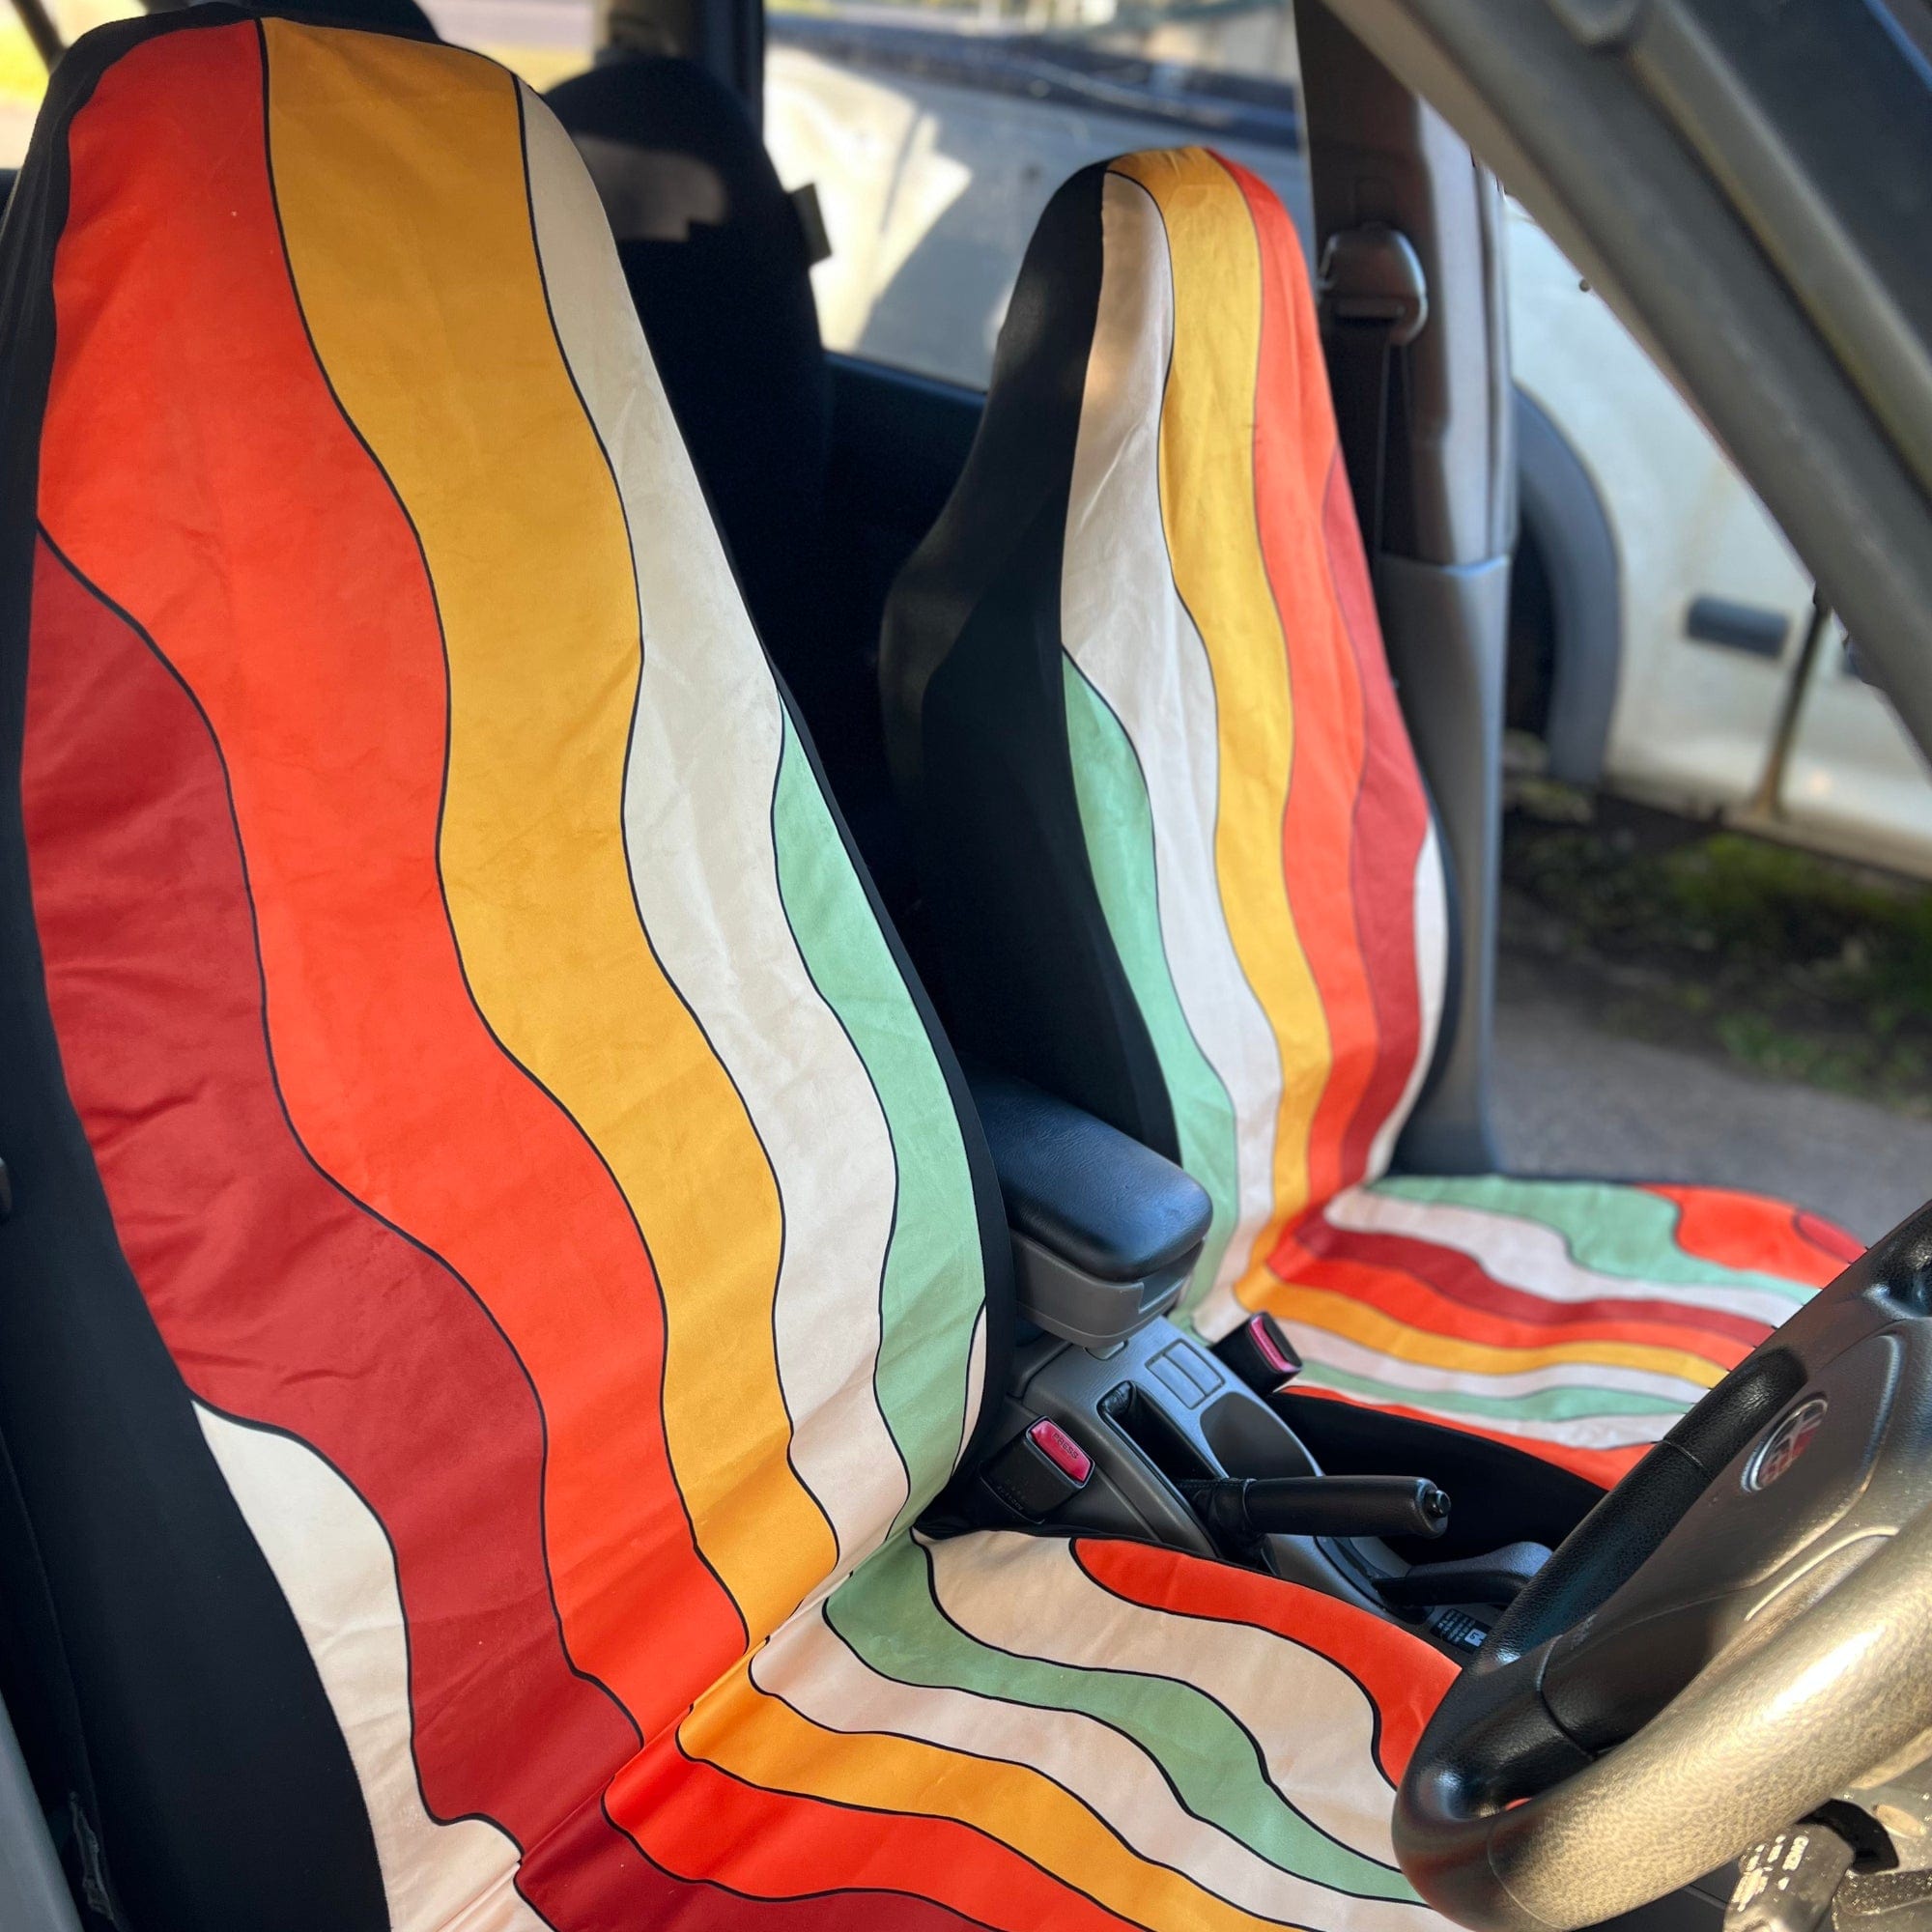 Groovy Flower Car Seat Covers for Vehicle 2 Pc, Vintage Floral 70s Hippie  Cute Front Car SUV Vans Gift Her Women Truck Protector Accessory -   Ireland